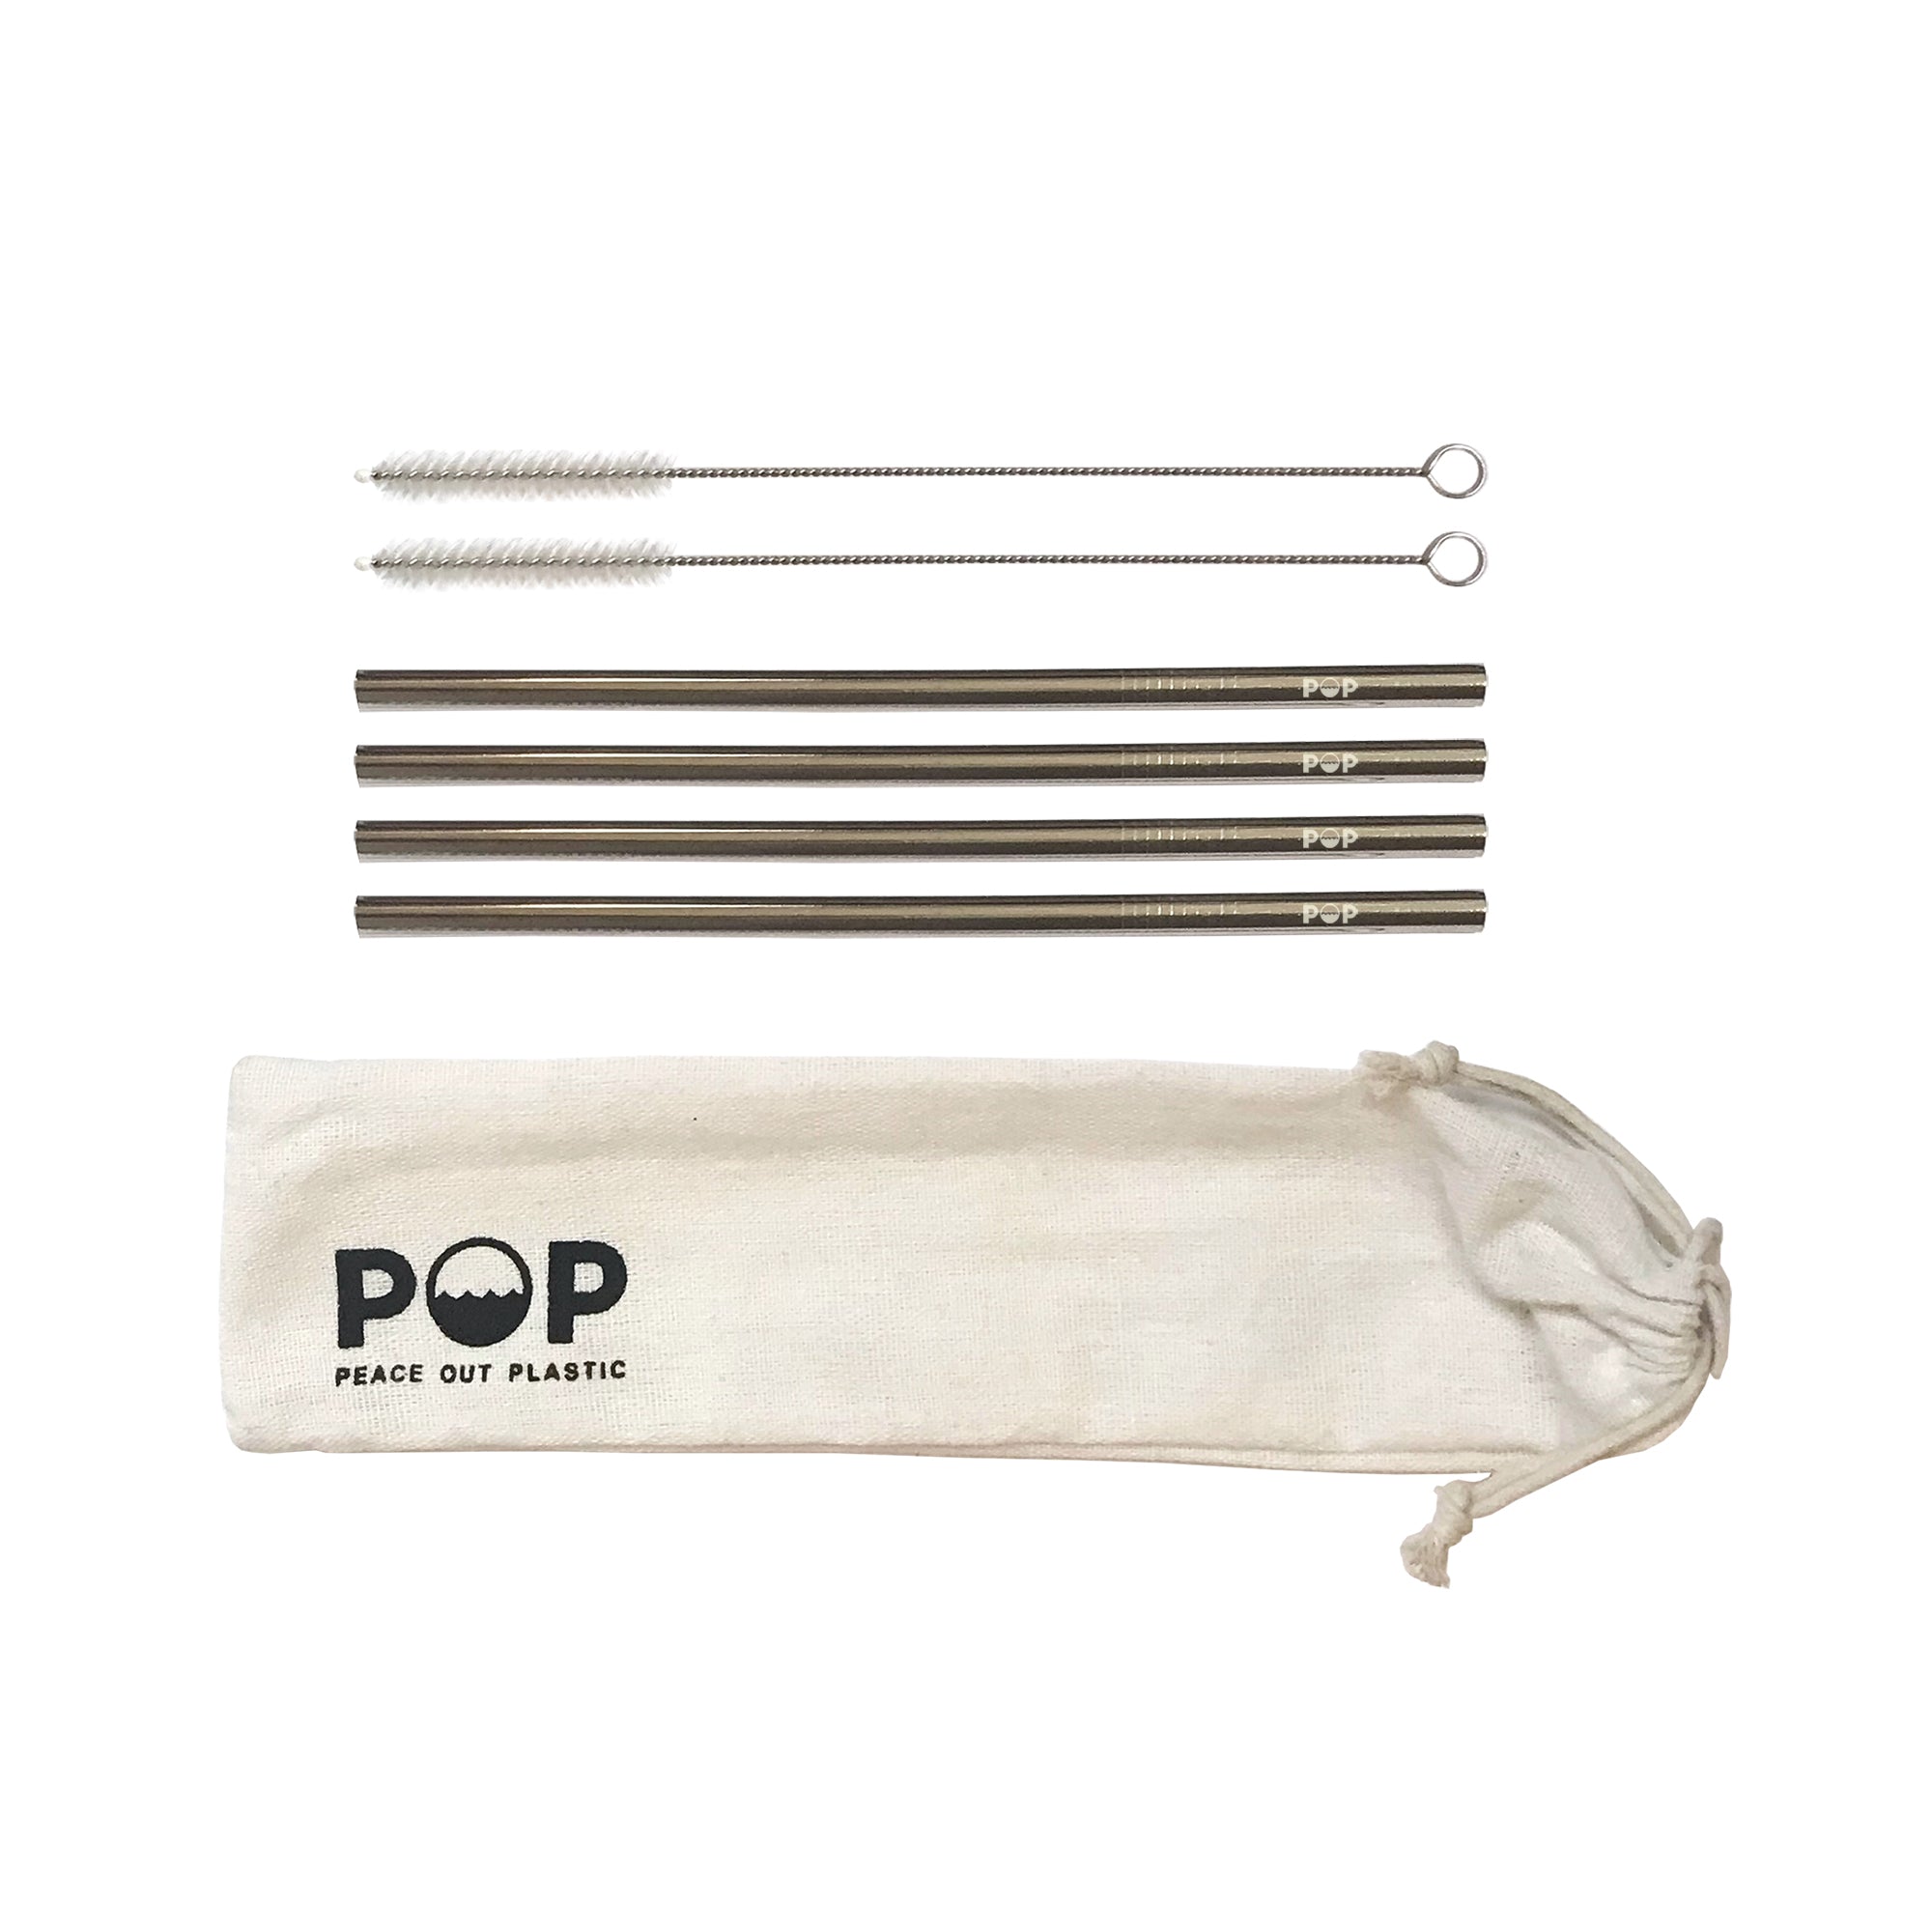 Stainless Steel Metal Drinking Straws Gift Set | Includes 4 Straws + 2 Cleaning Brushes + Pouch